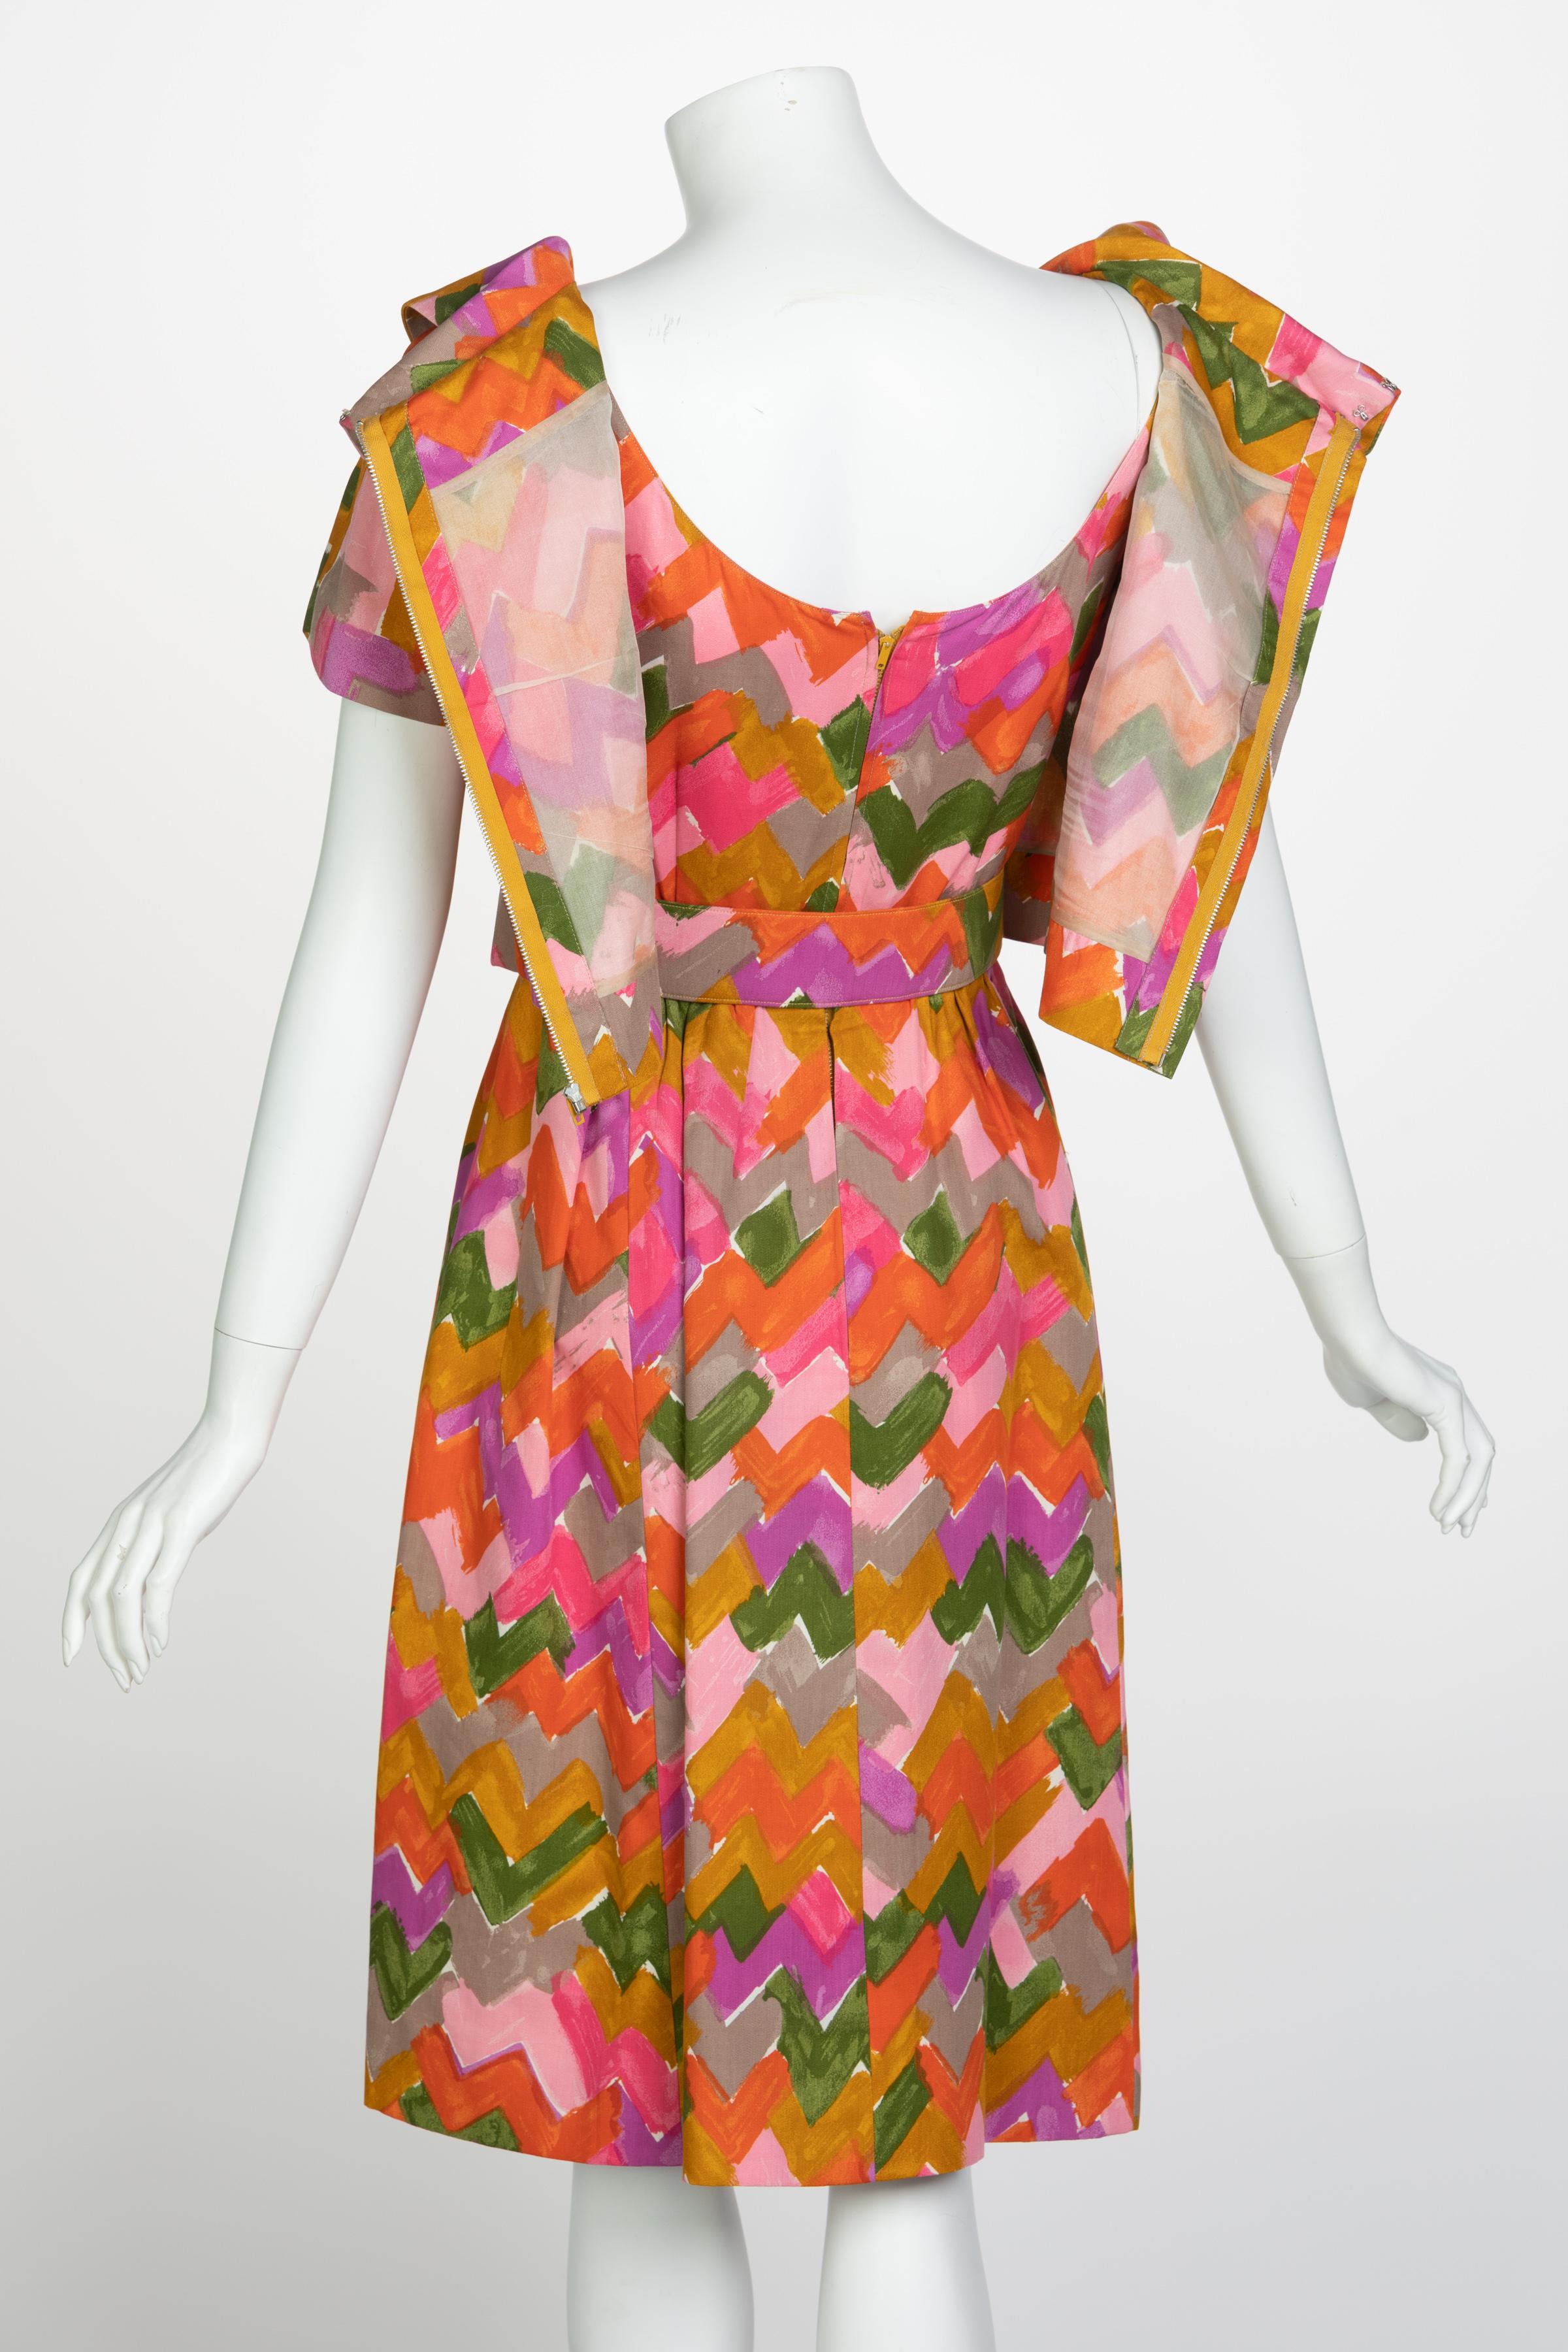 Christian Dior Demi-Couture Colorful Chevron Tailored Belted Dress, 1950s 3